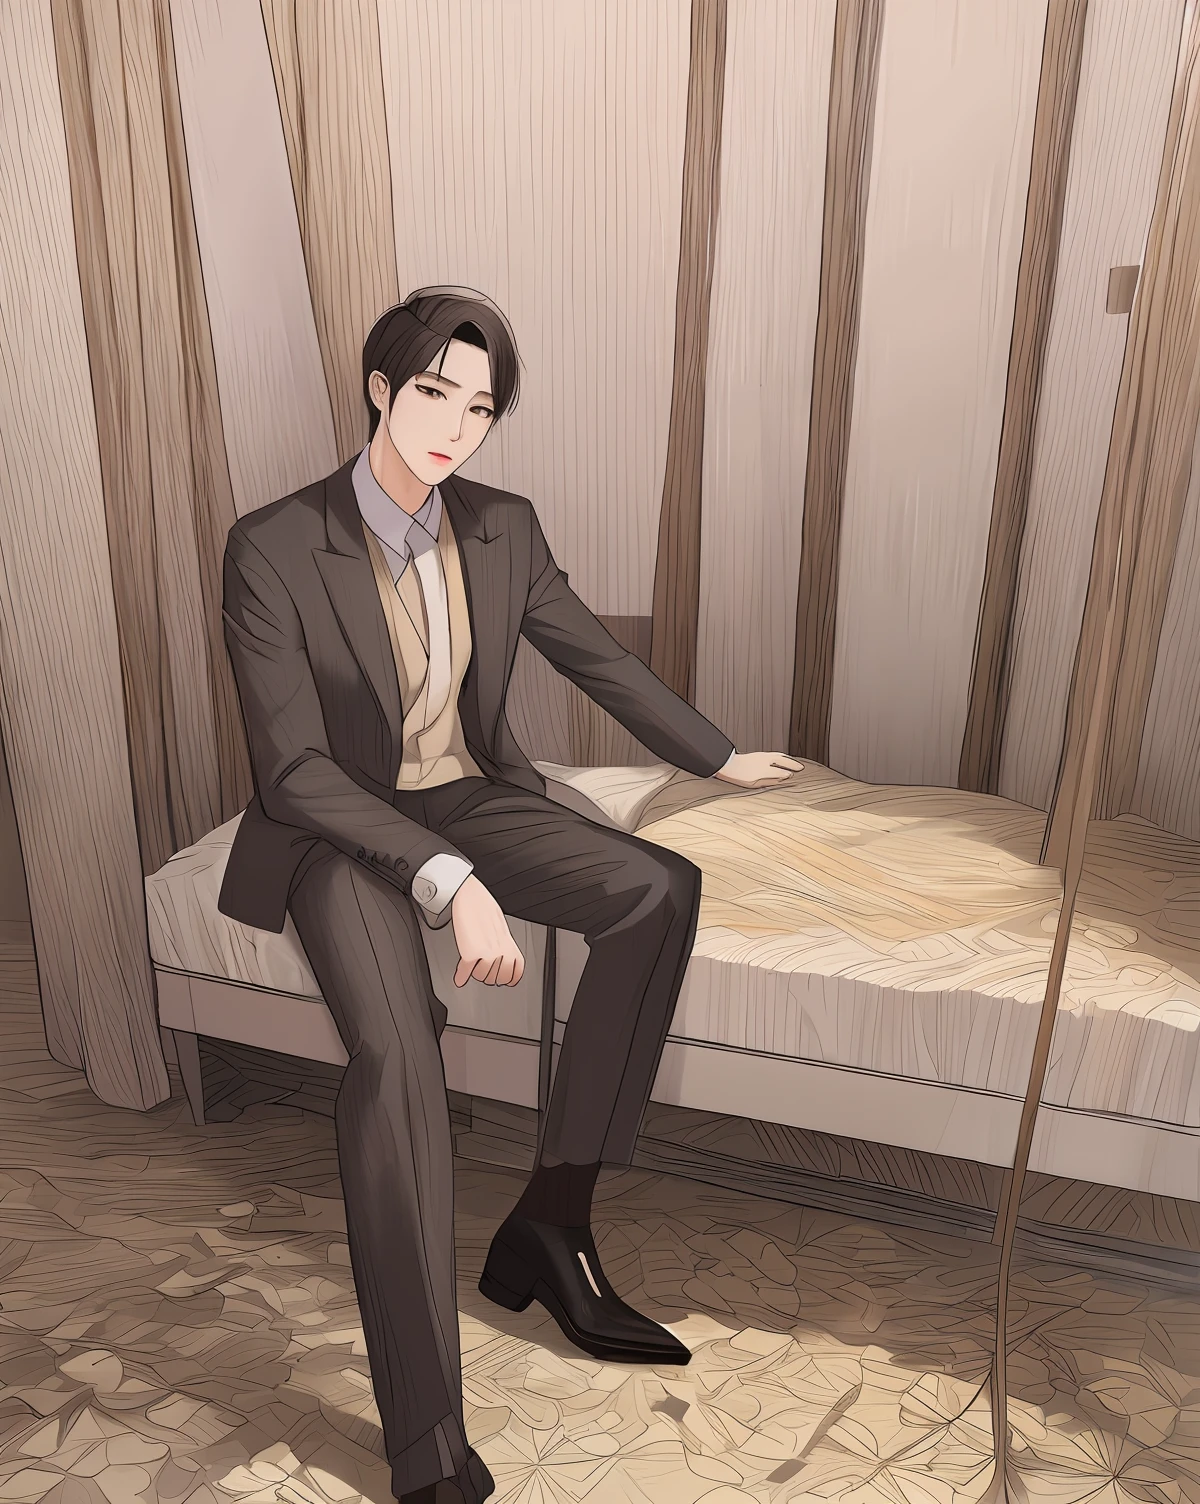 there is a man sitting on a bed in a suit, sitting on the bed, high quality fanart, sitting on a bed, official fanart, by Yang J, detailed fanart, highly detailed exquisite fanart, he is wearing a suit, inspired by Kim Eung-hwan, in his suit, beautiful androgynous prince, delicate androgynous prince, male art